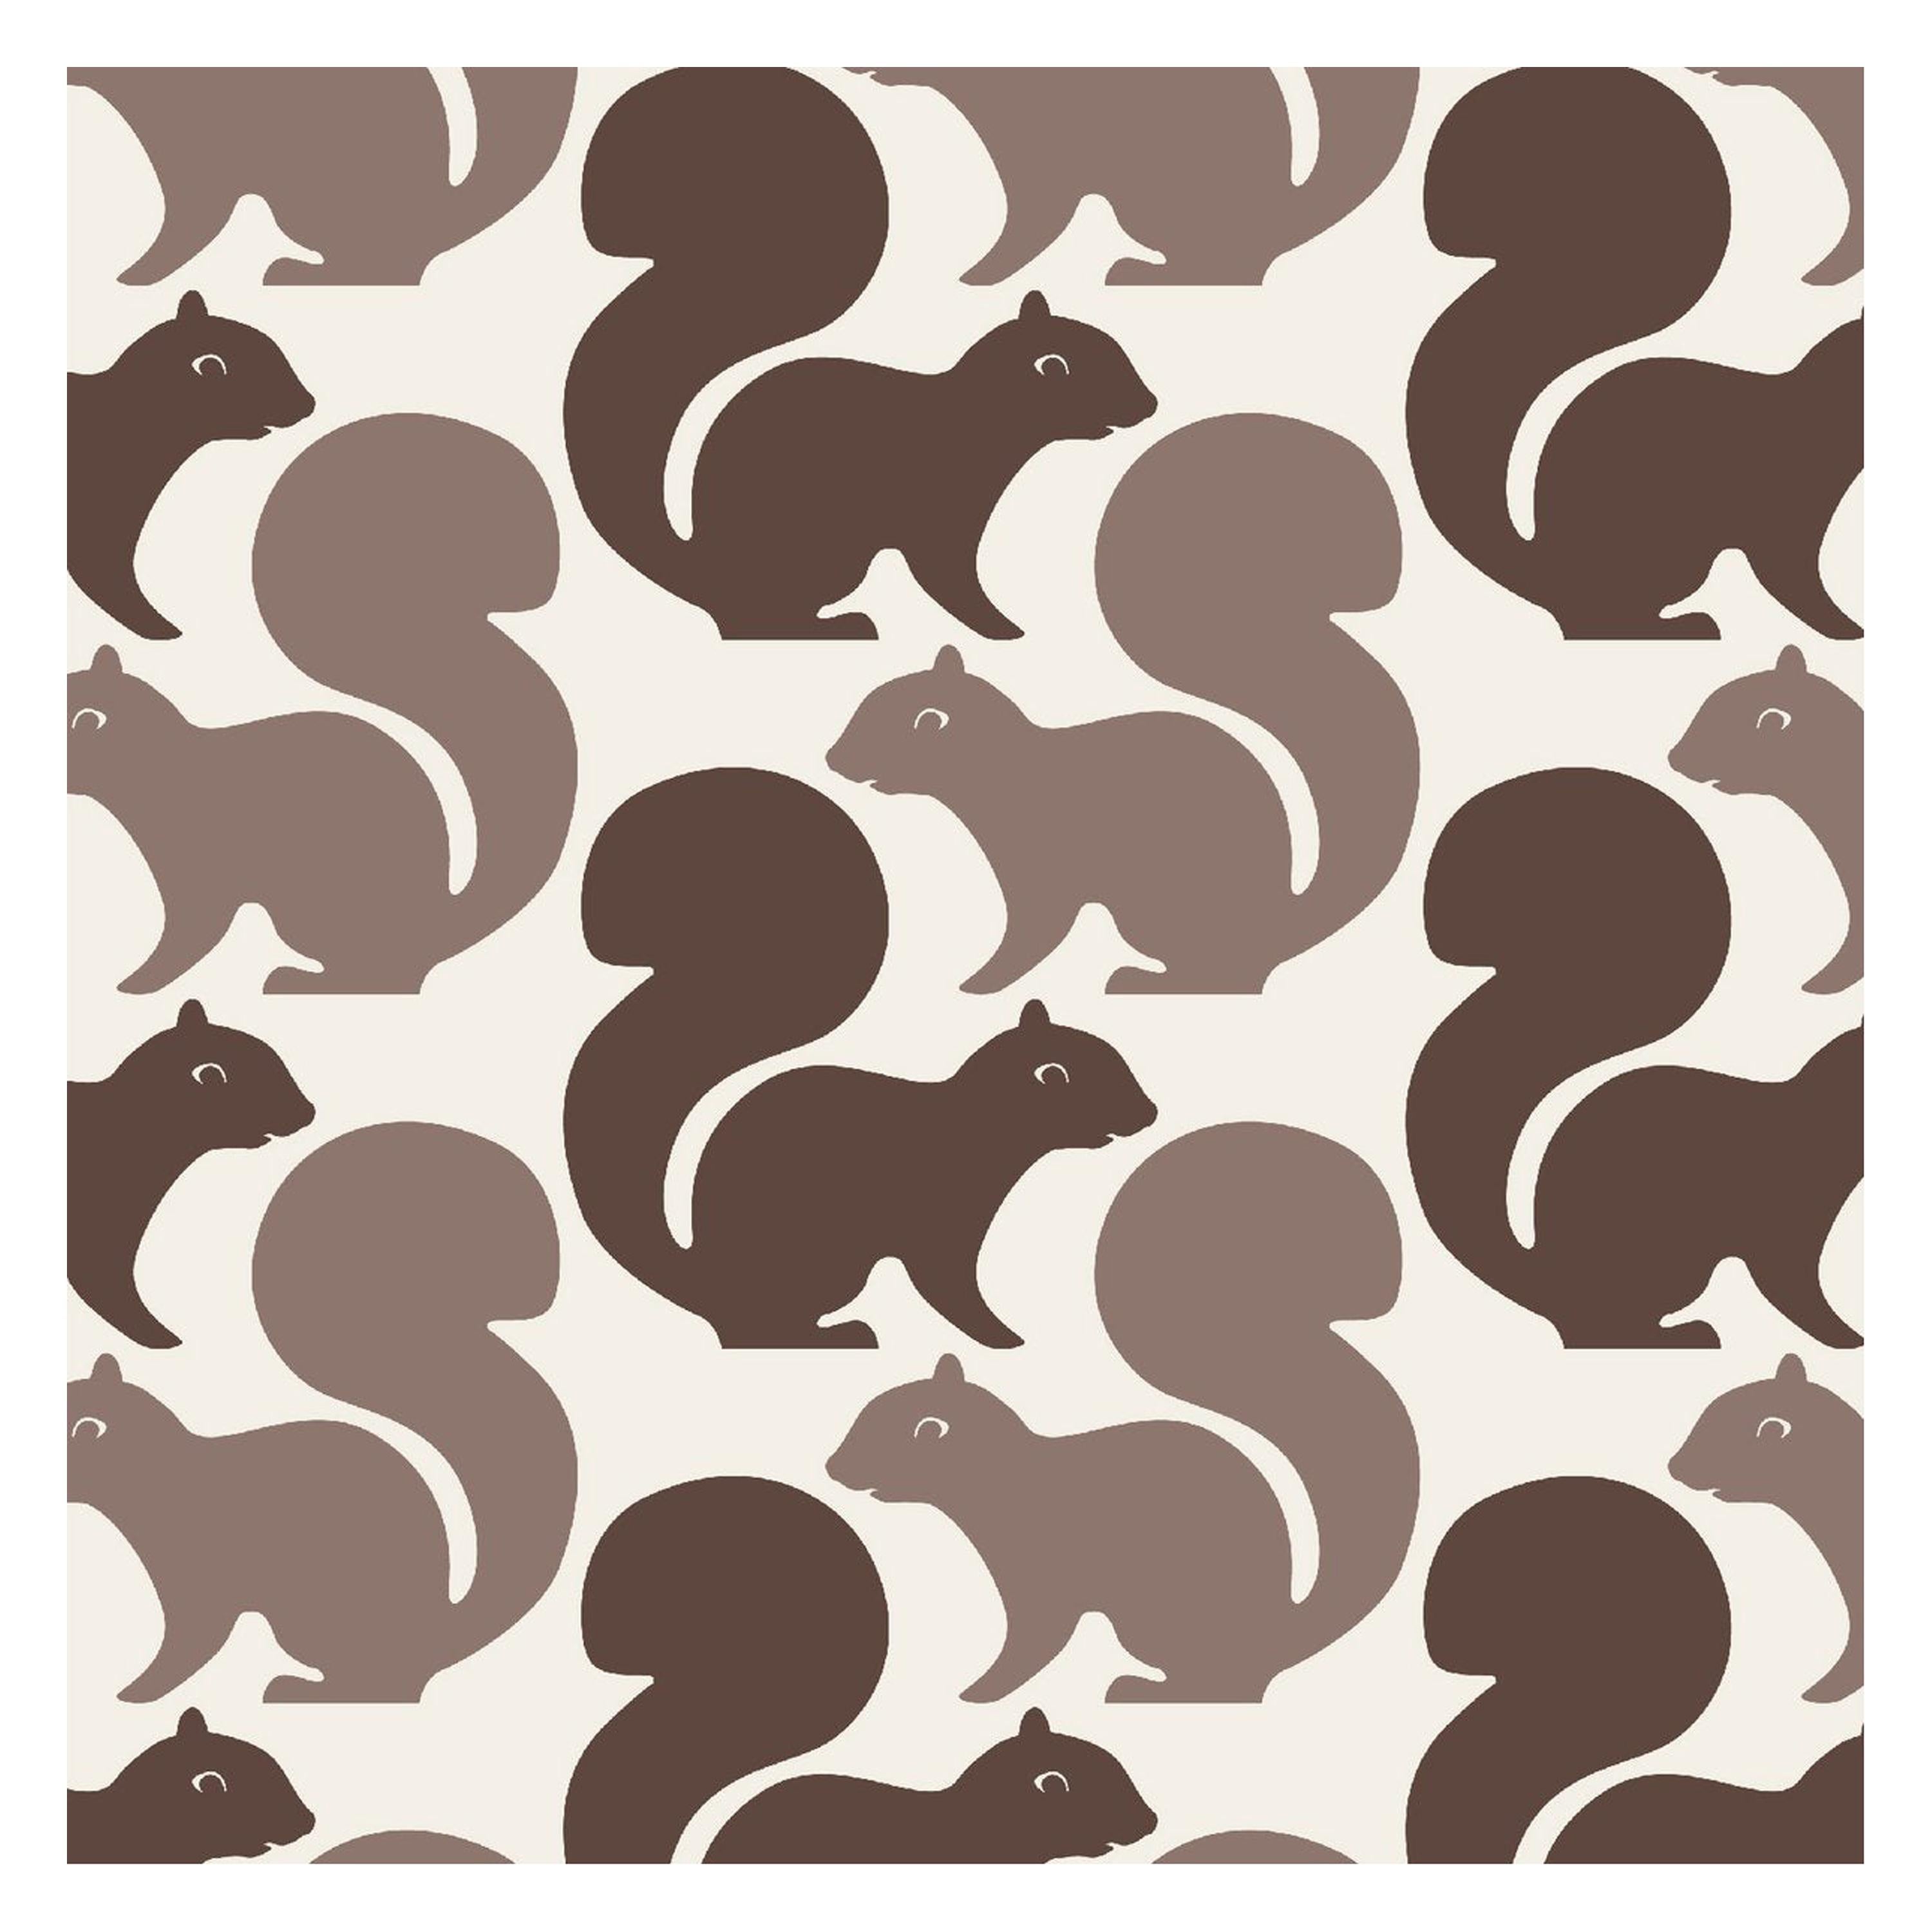 Squirrels Designer Wallpaper in Latte 'Chocolate Brown and Khaki on Cream' For Sale